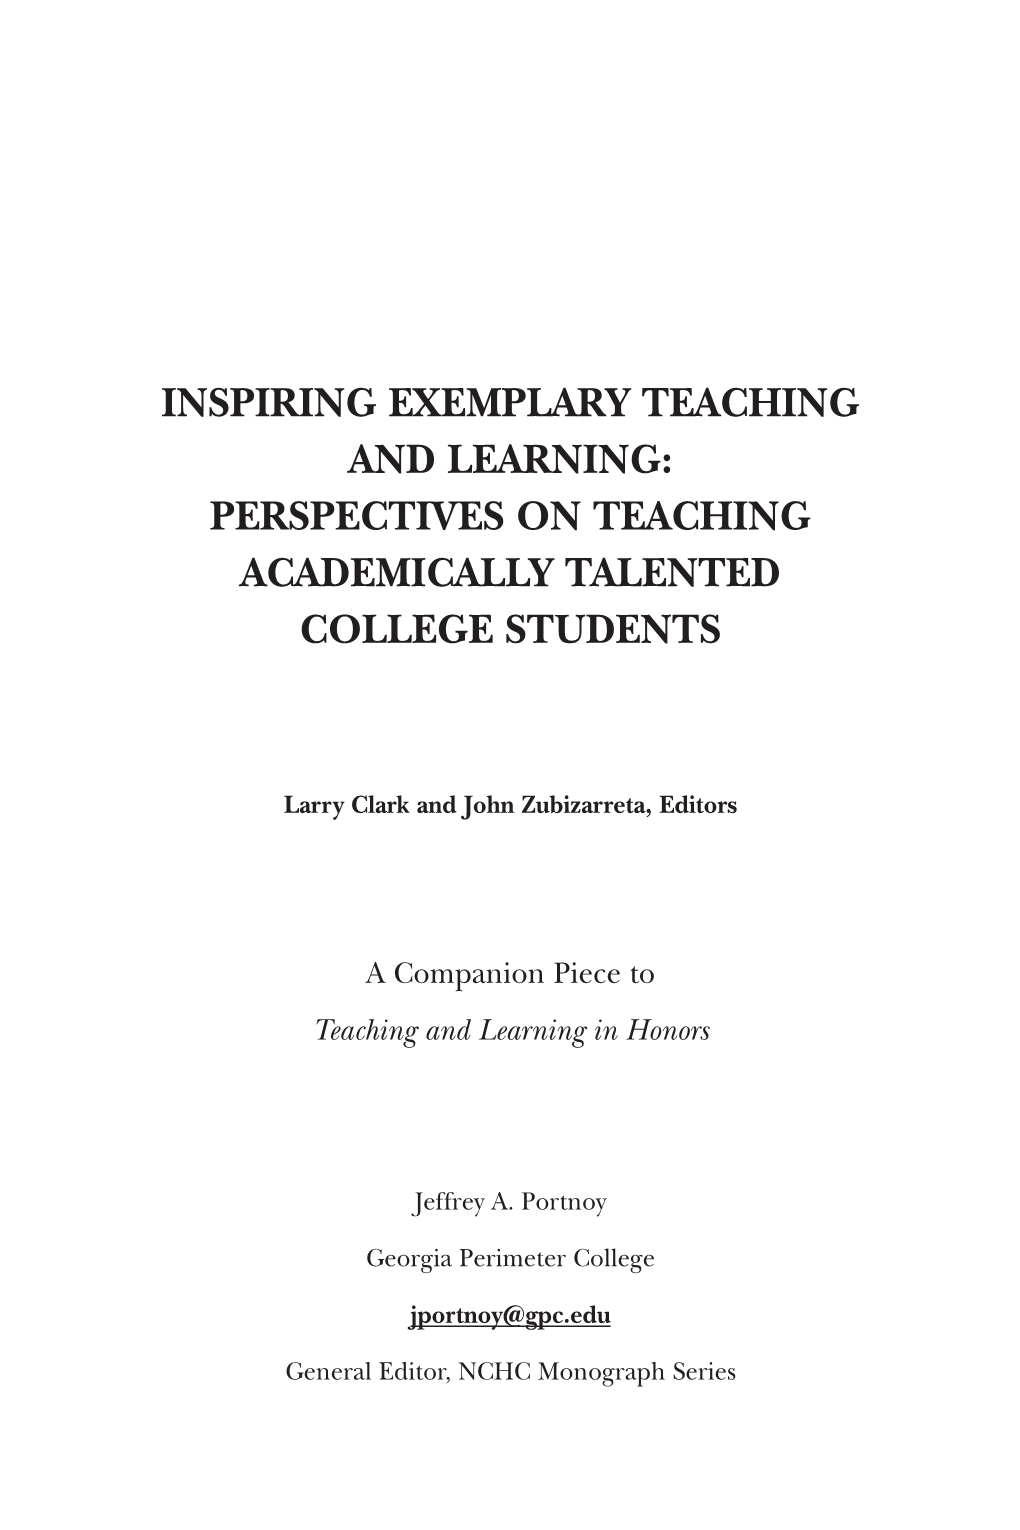 Inspiring Exemplary Teaching and Learning: Perspectives on Teaching Academically Talented College Students